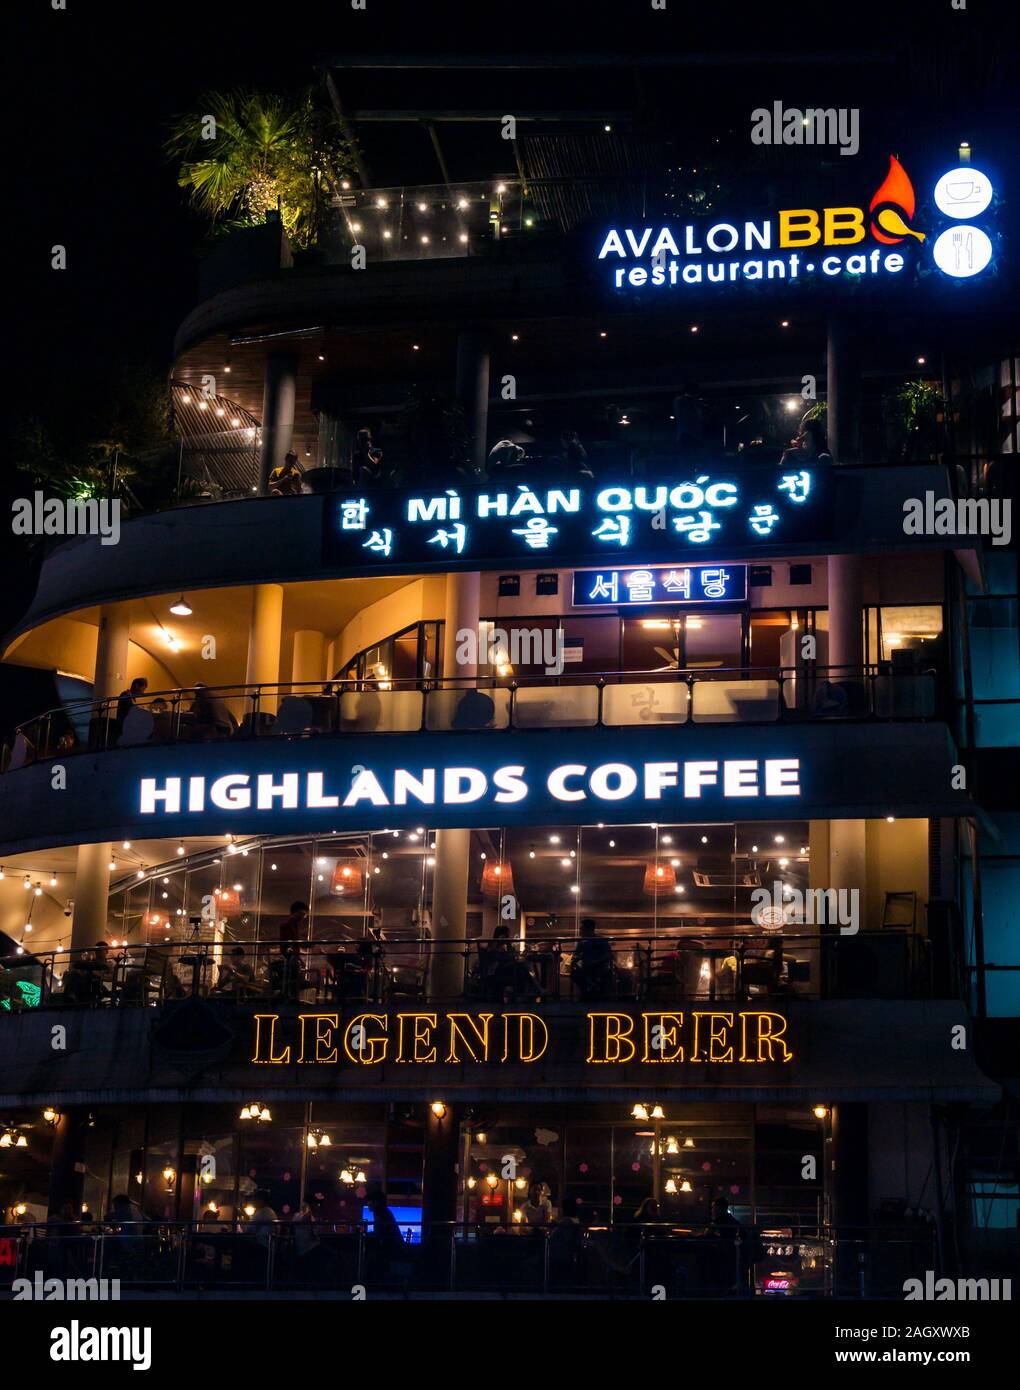 Restaurants and bars lit up at night with a Highlands Coffee and Legend Beer, Hoan Kiem District, Hanoi, Vietnam, Asia Stock Photo